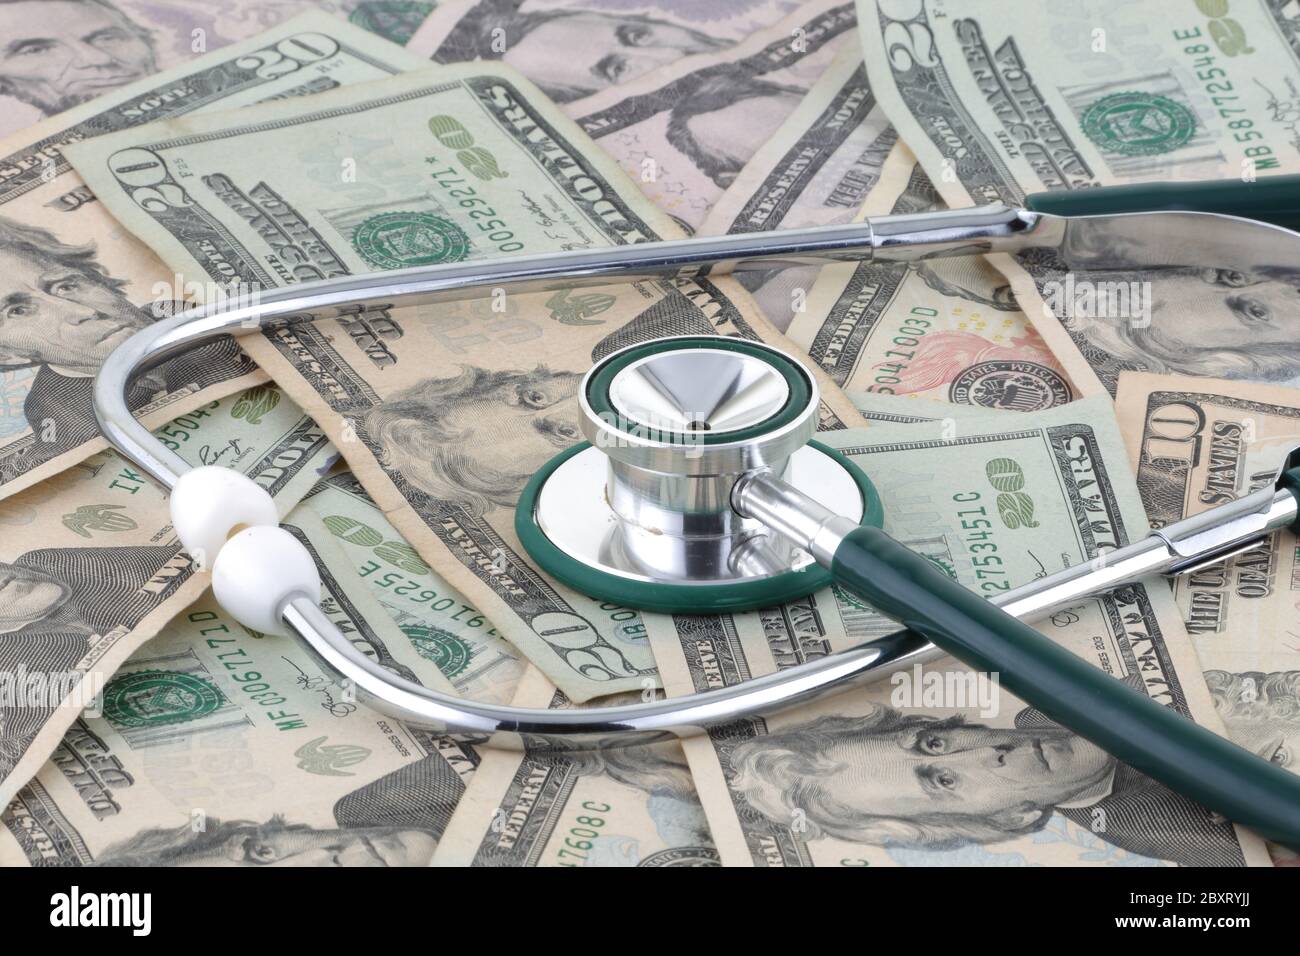 Medical stethoscope on a pile of money signifying the relationship of money and medicine Stock Photo